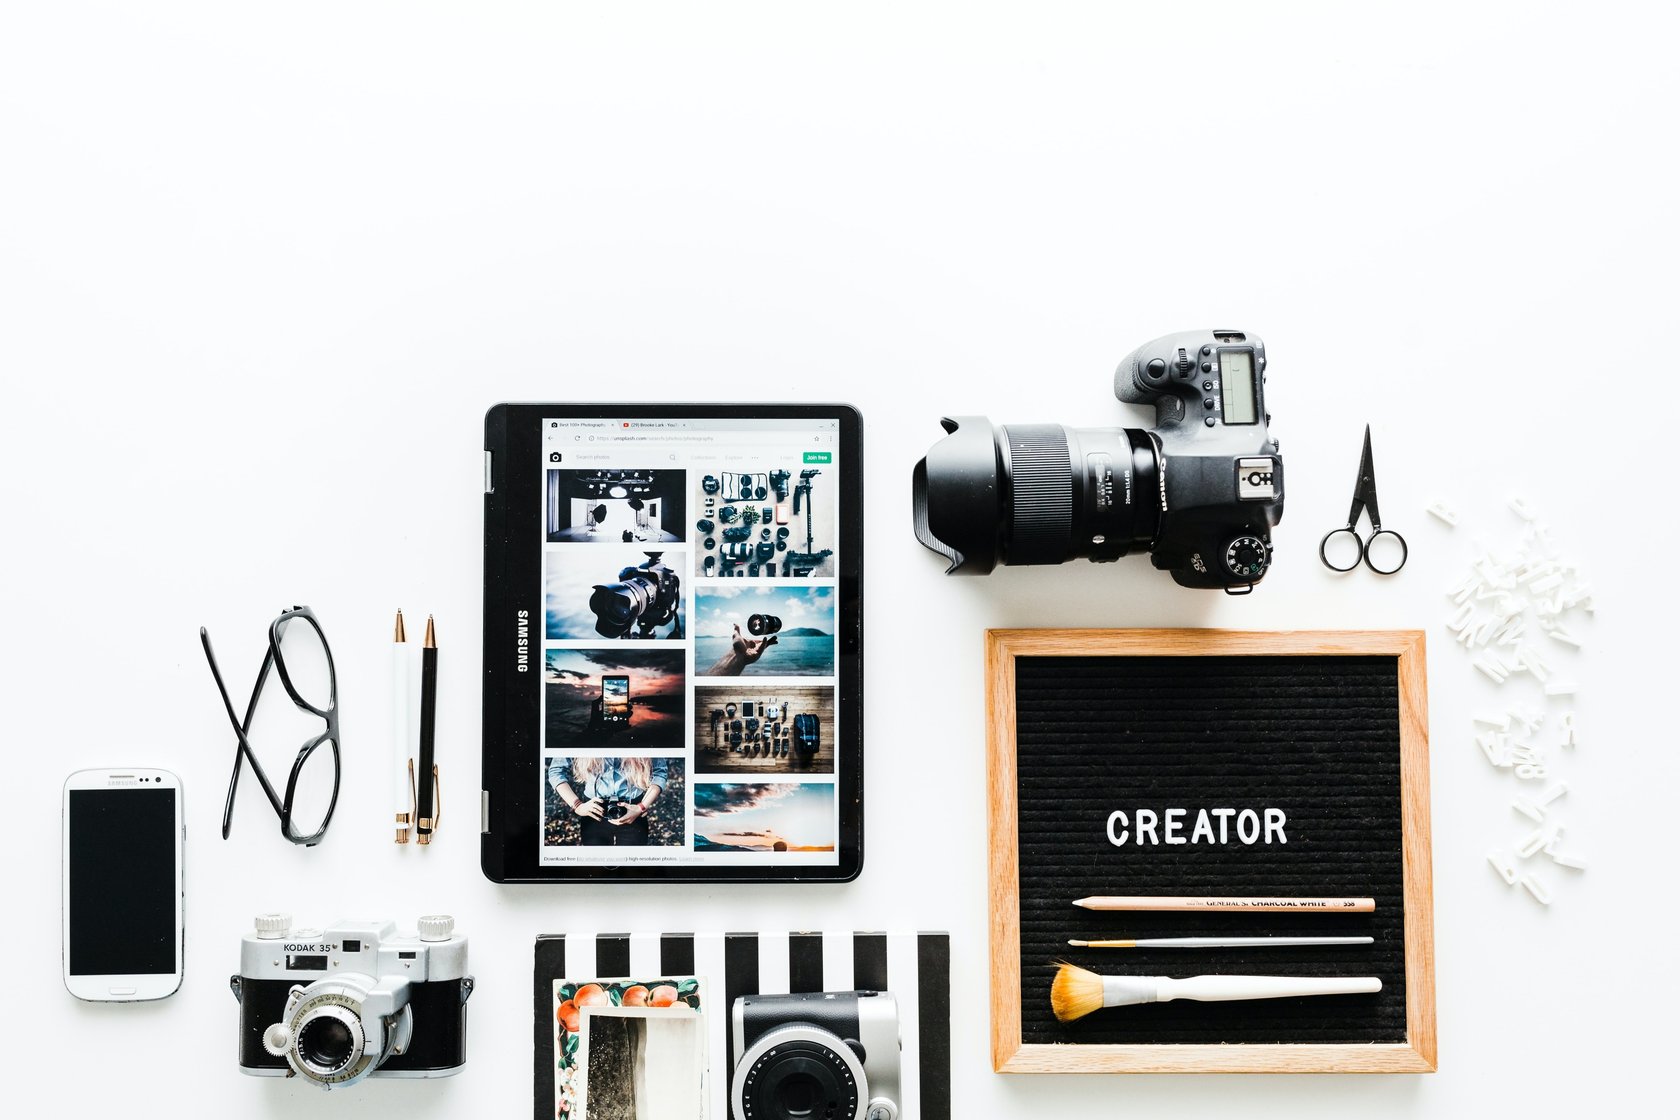 5 Top Business Marketing Photography Books For Beginners